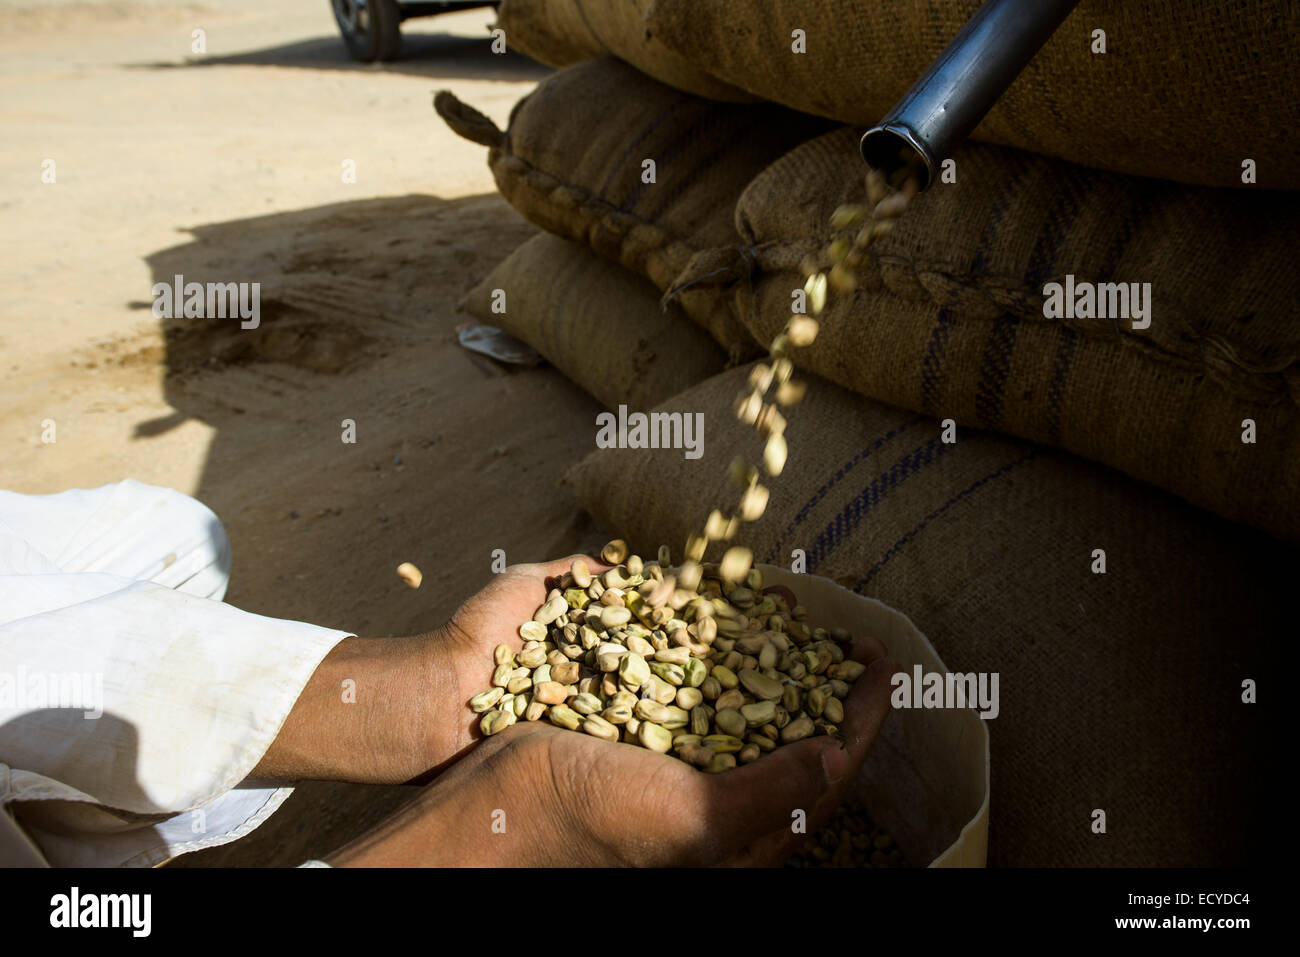 Taking out faba beans from a sack, Sudan Stock Photo